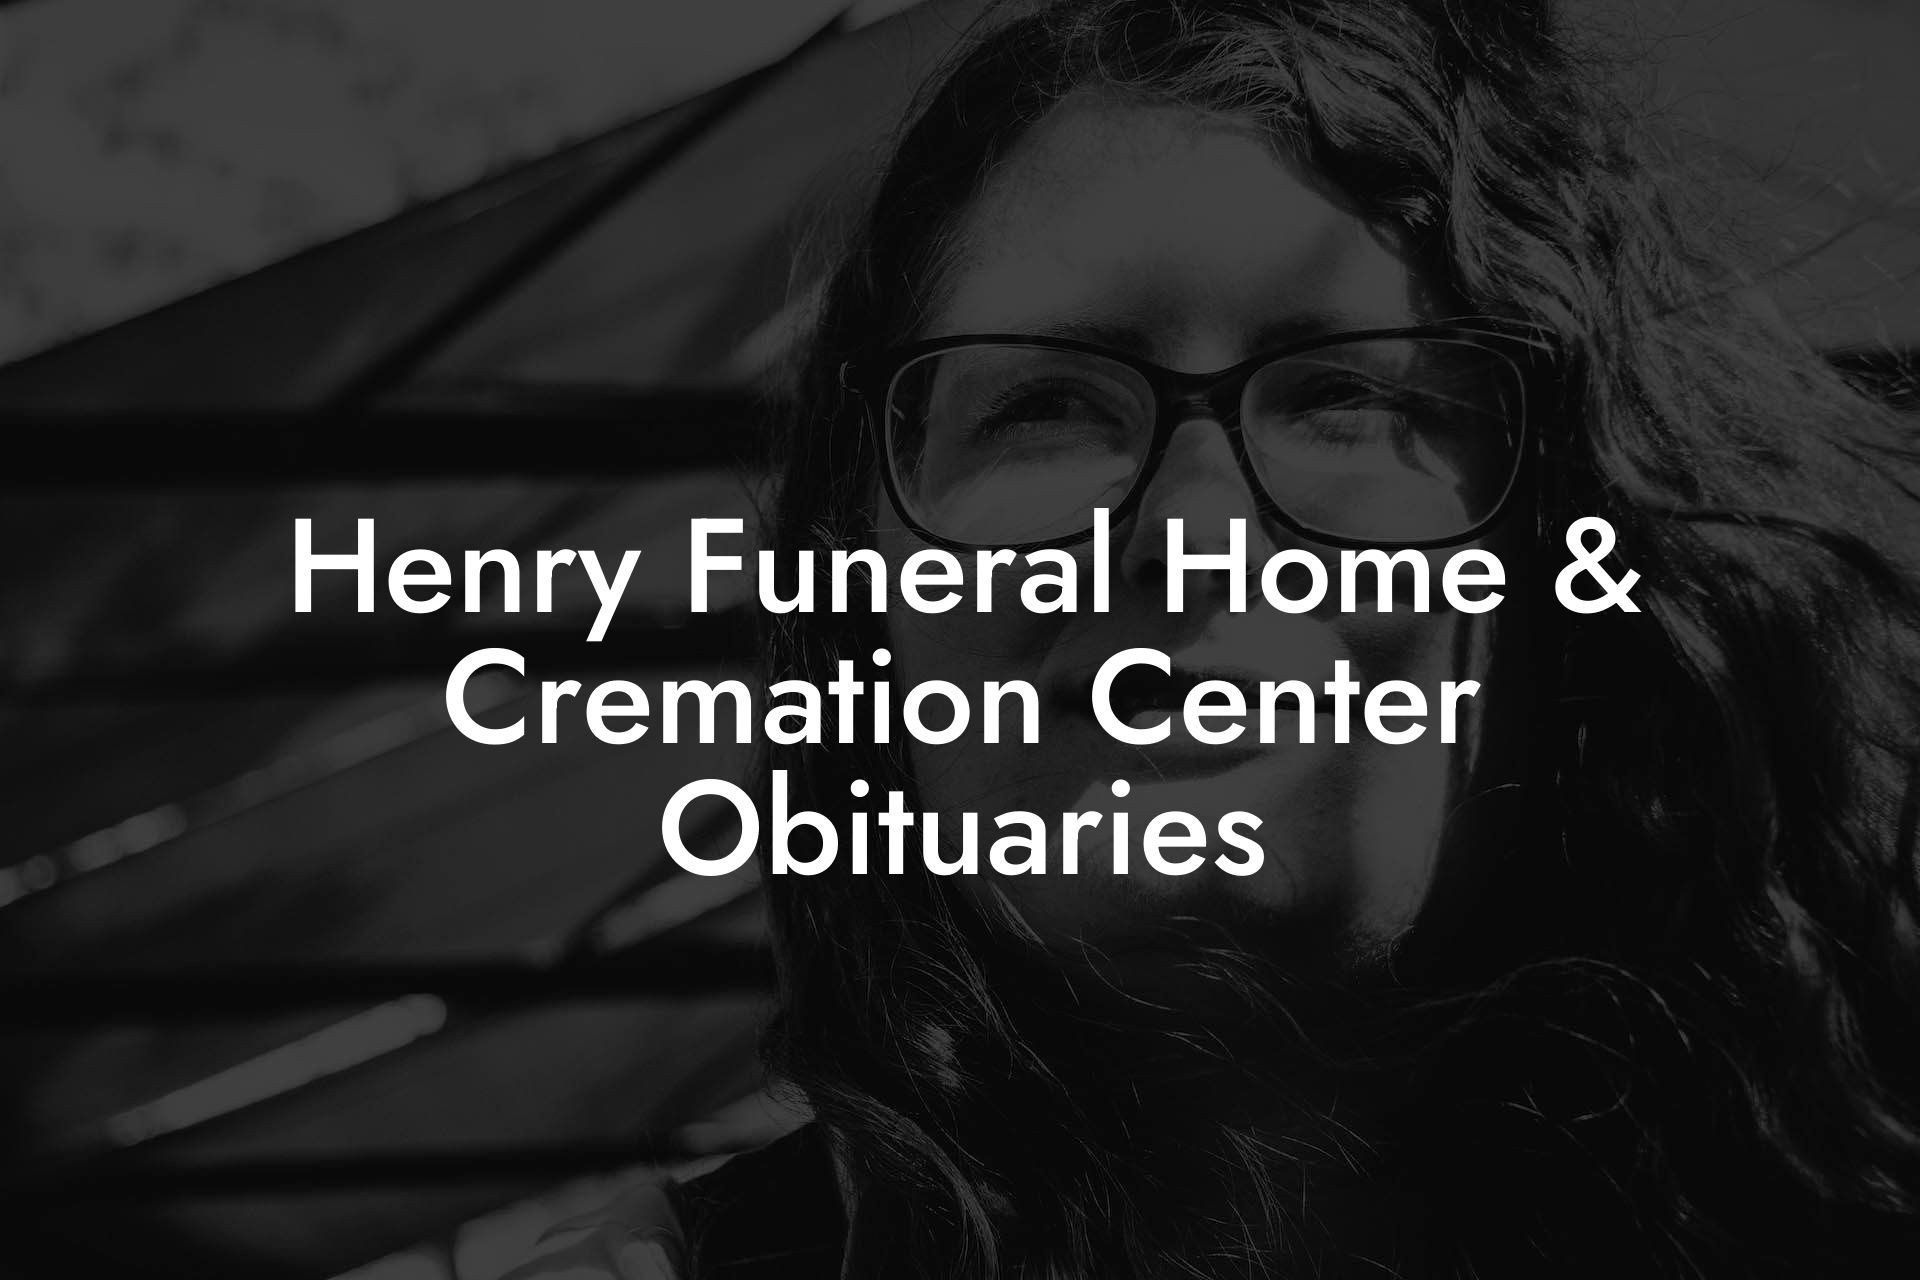 Henry Funeral Home & Cremation Center Obituaries